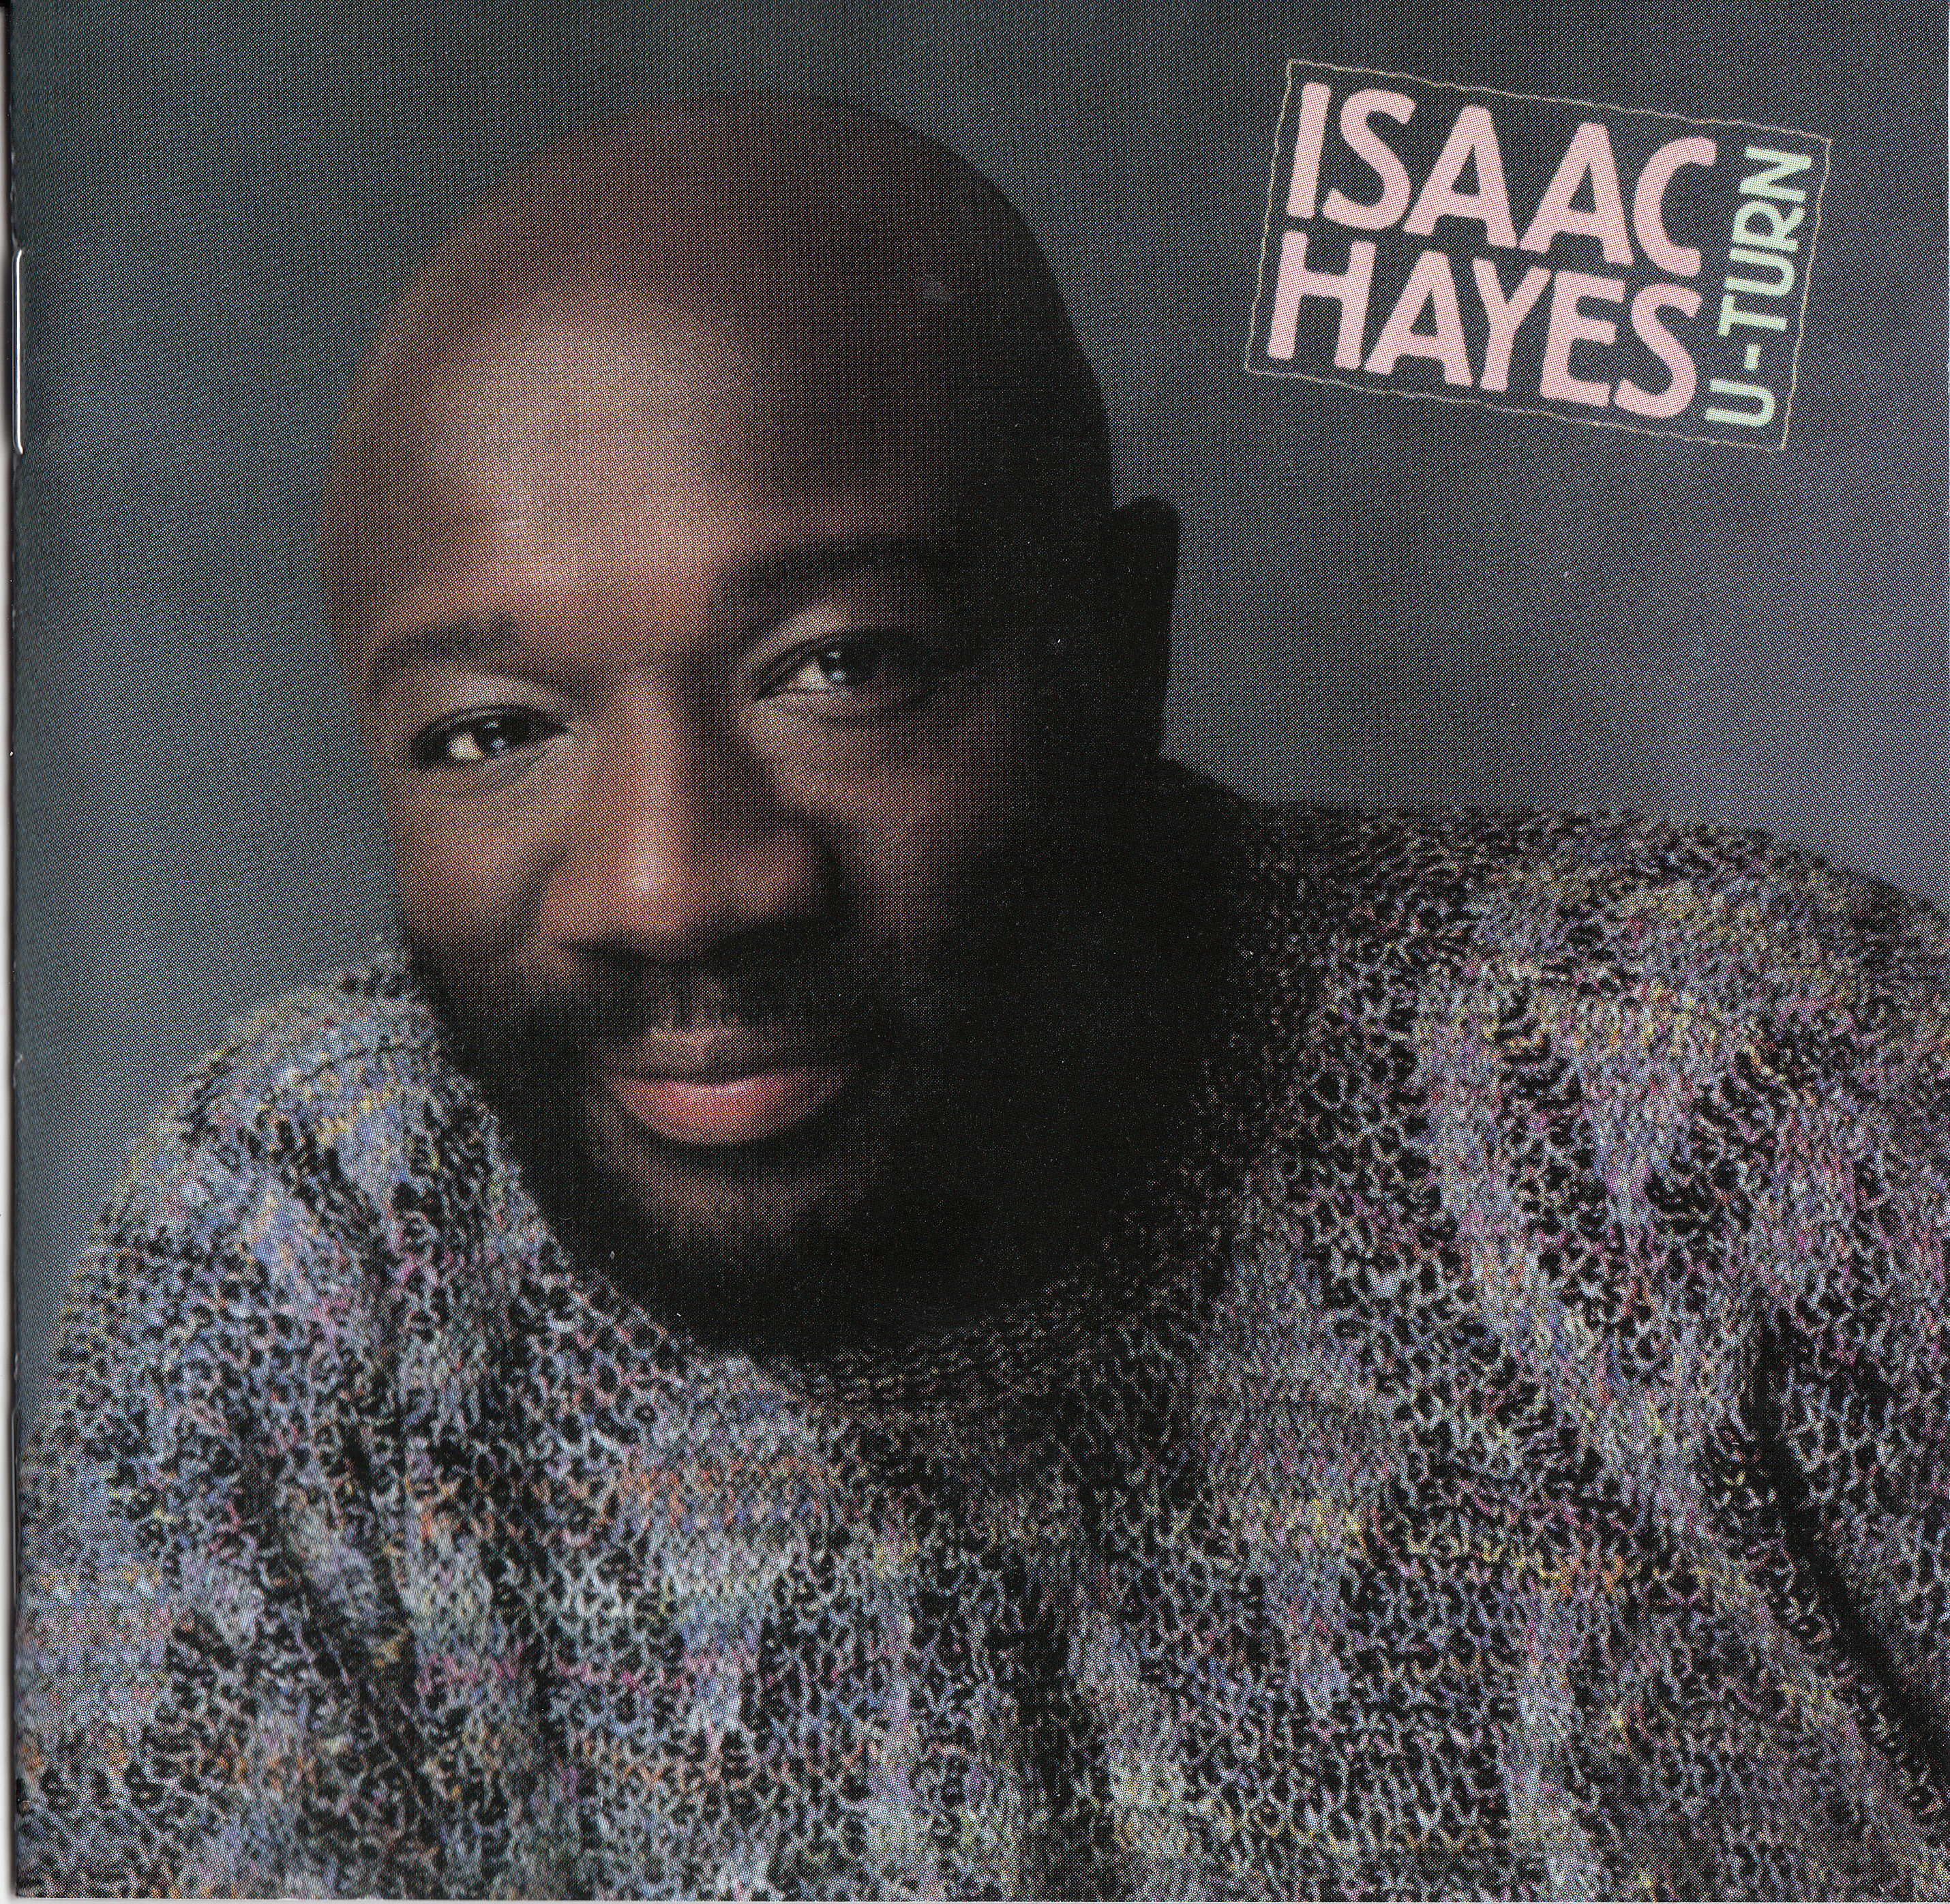 Isaac Hayes - Tournant - Cassette d'occasion - J7685z - Photo 1/1